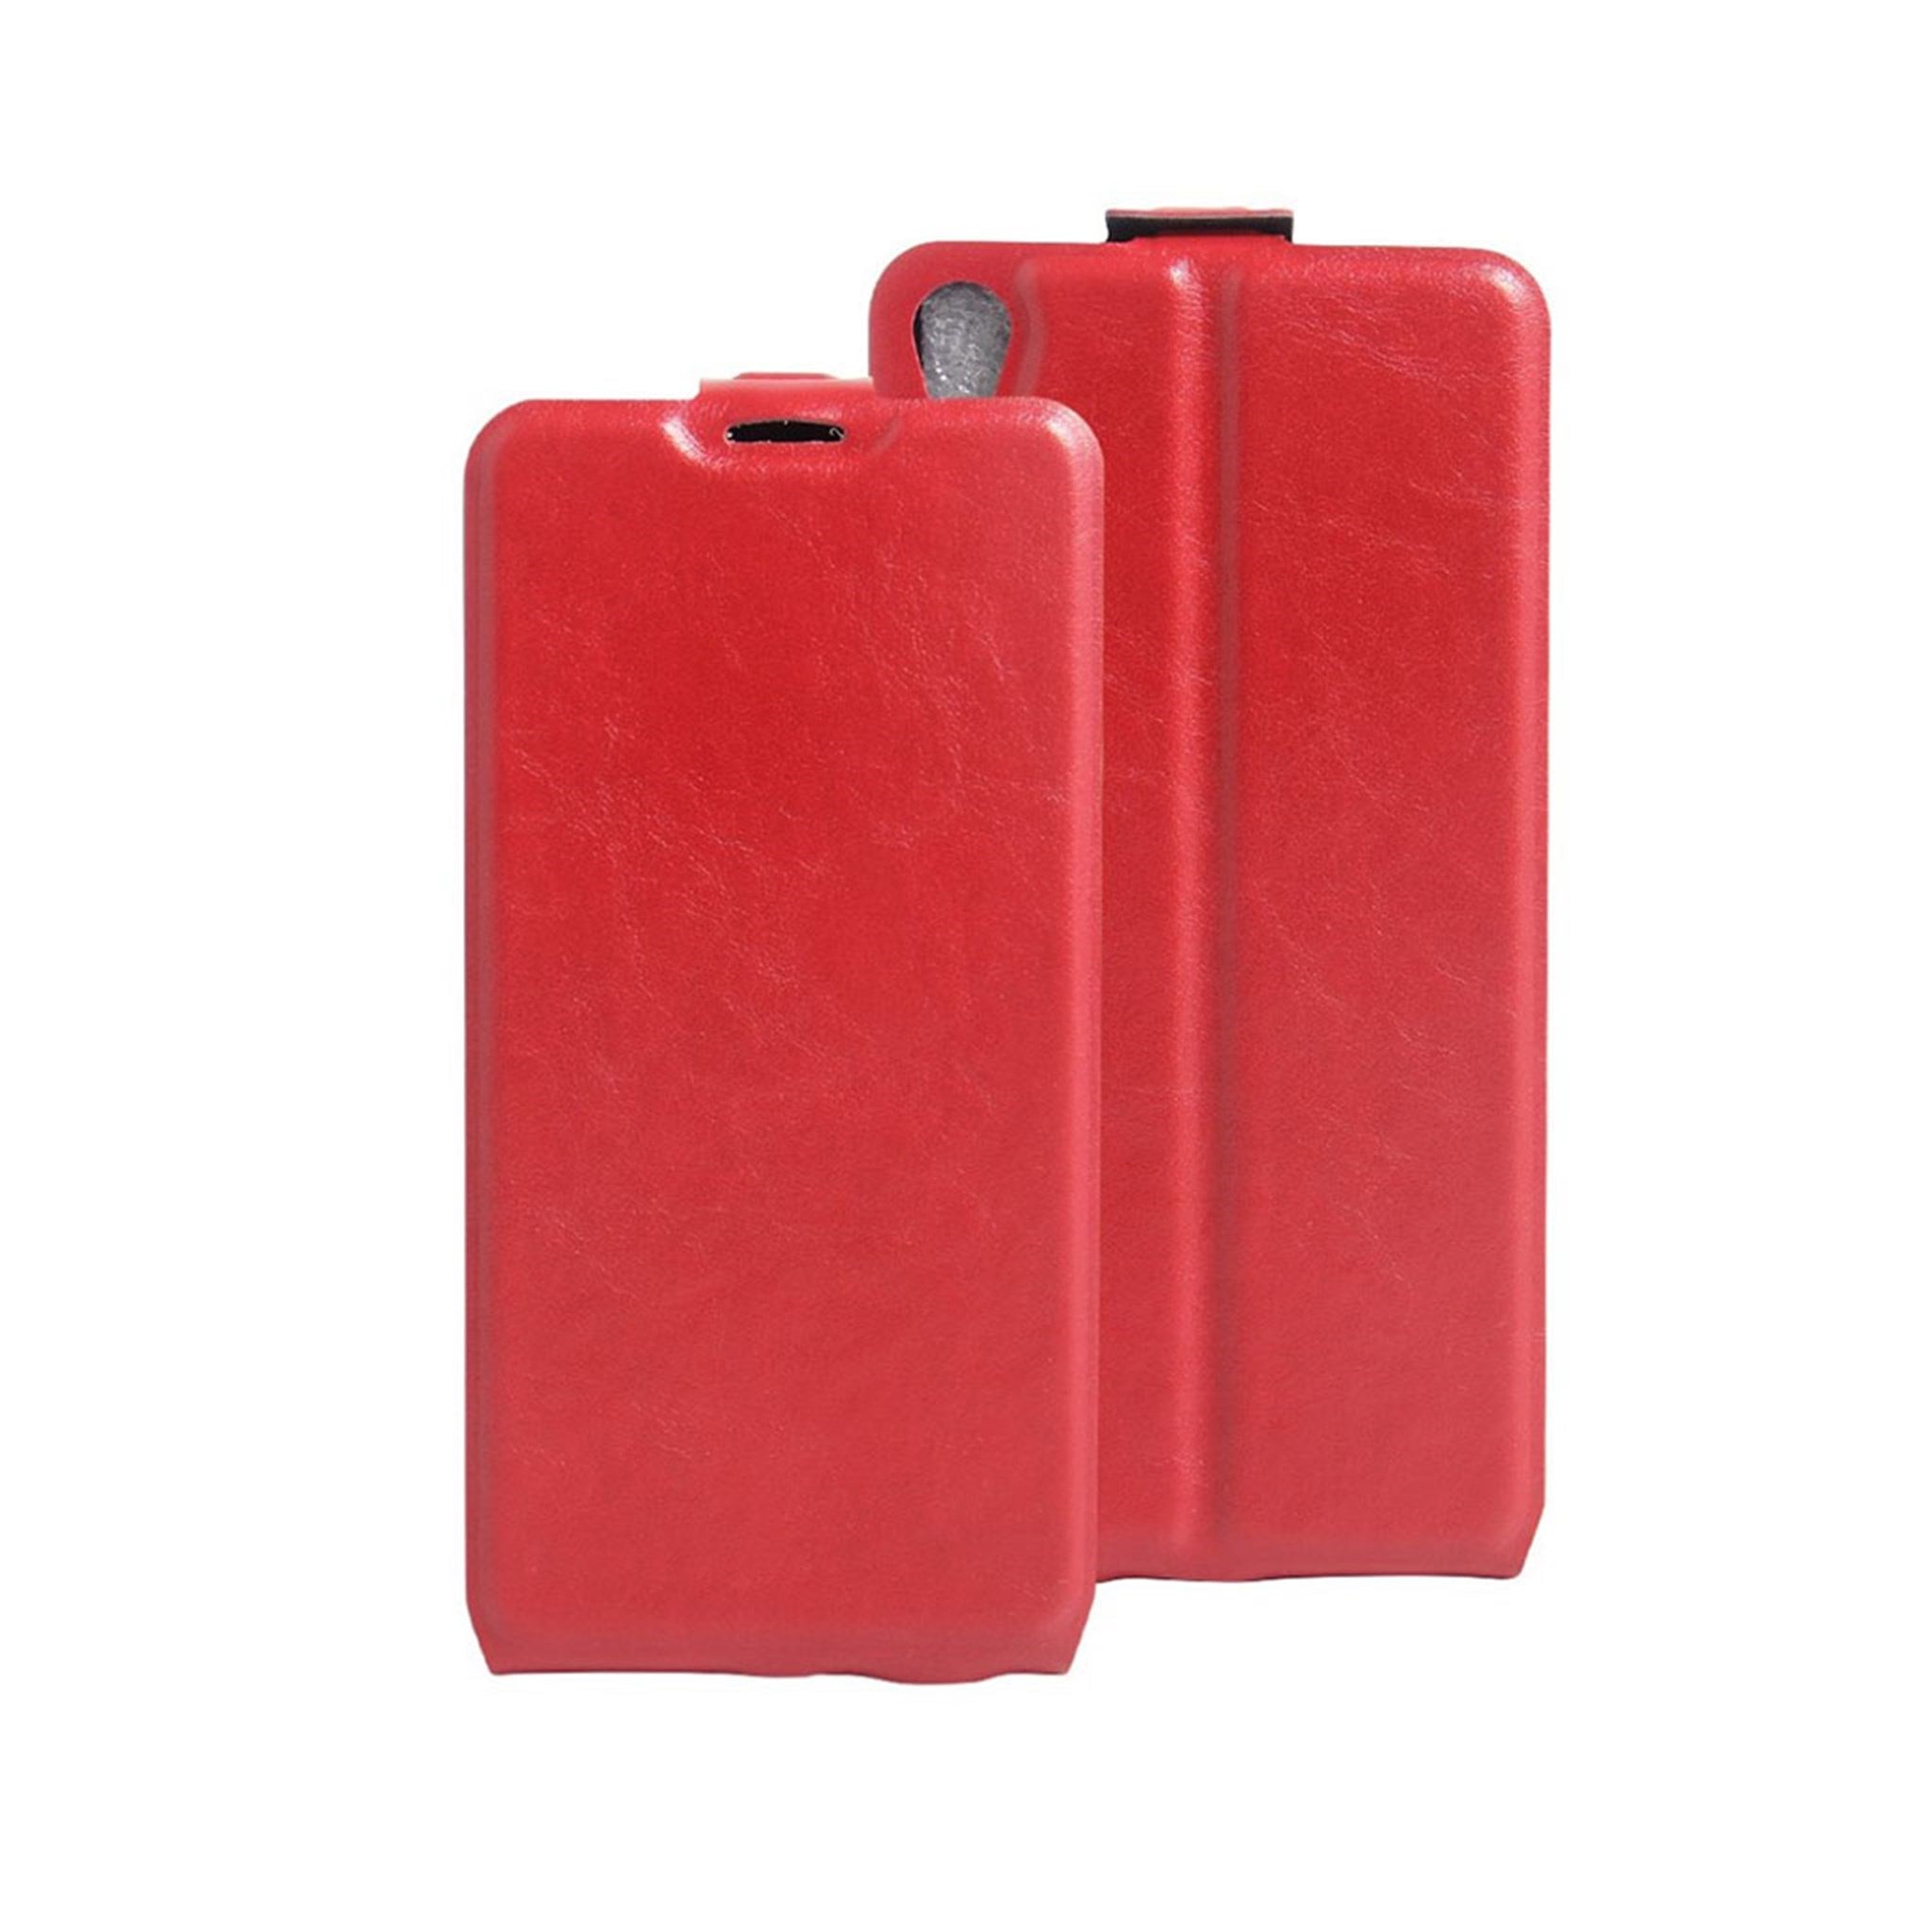 Amdrup Sony Xperia E5 Vertical Leather Flip Case - Red